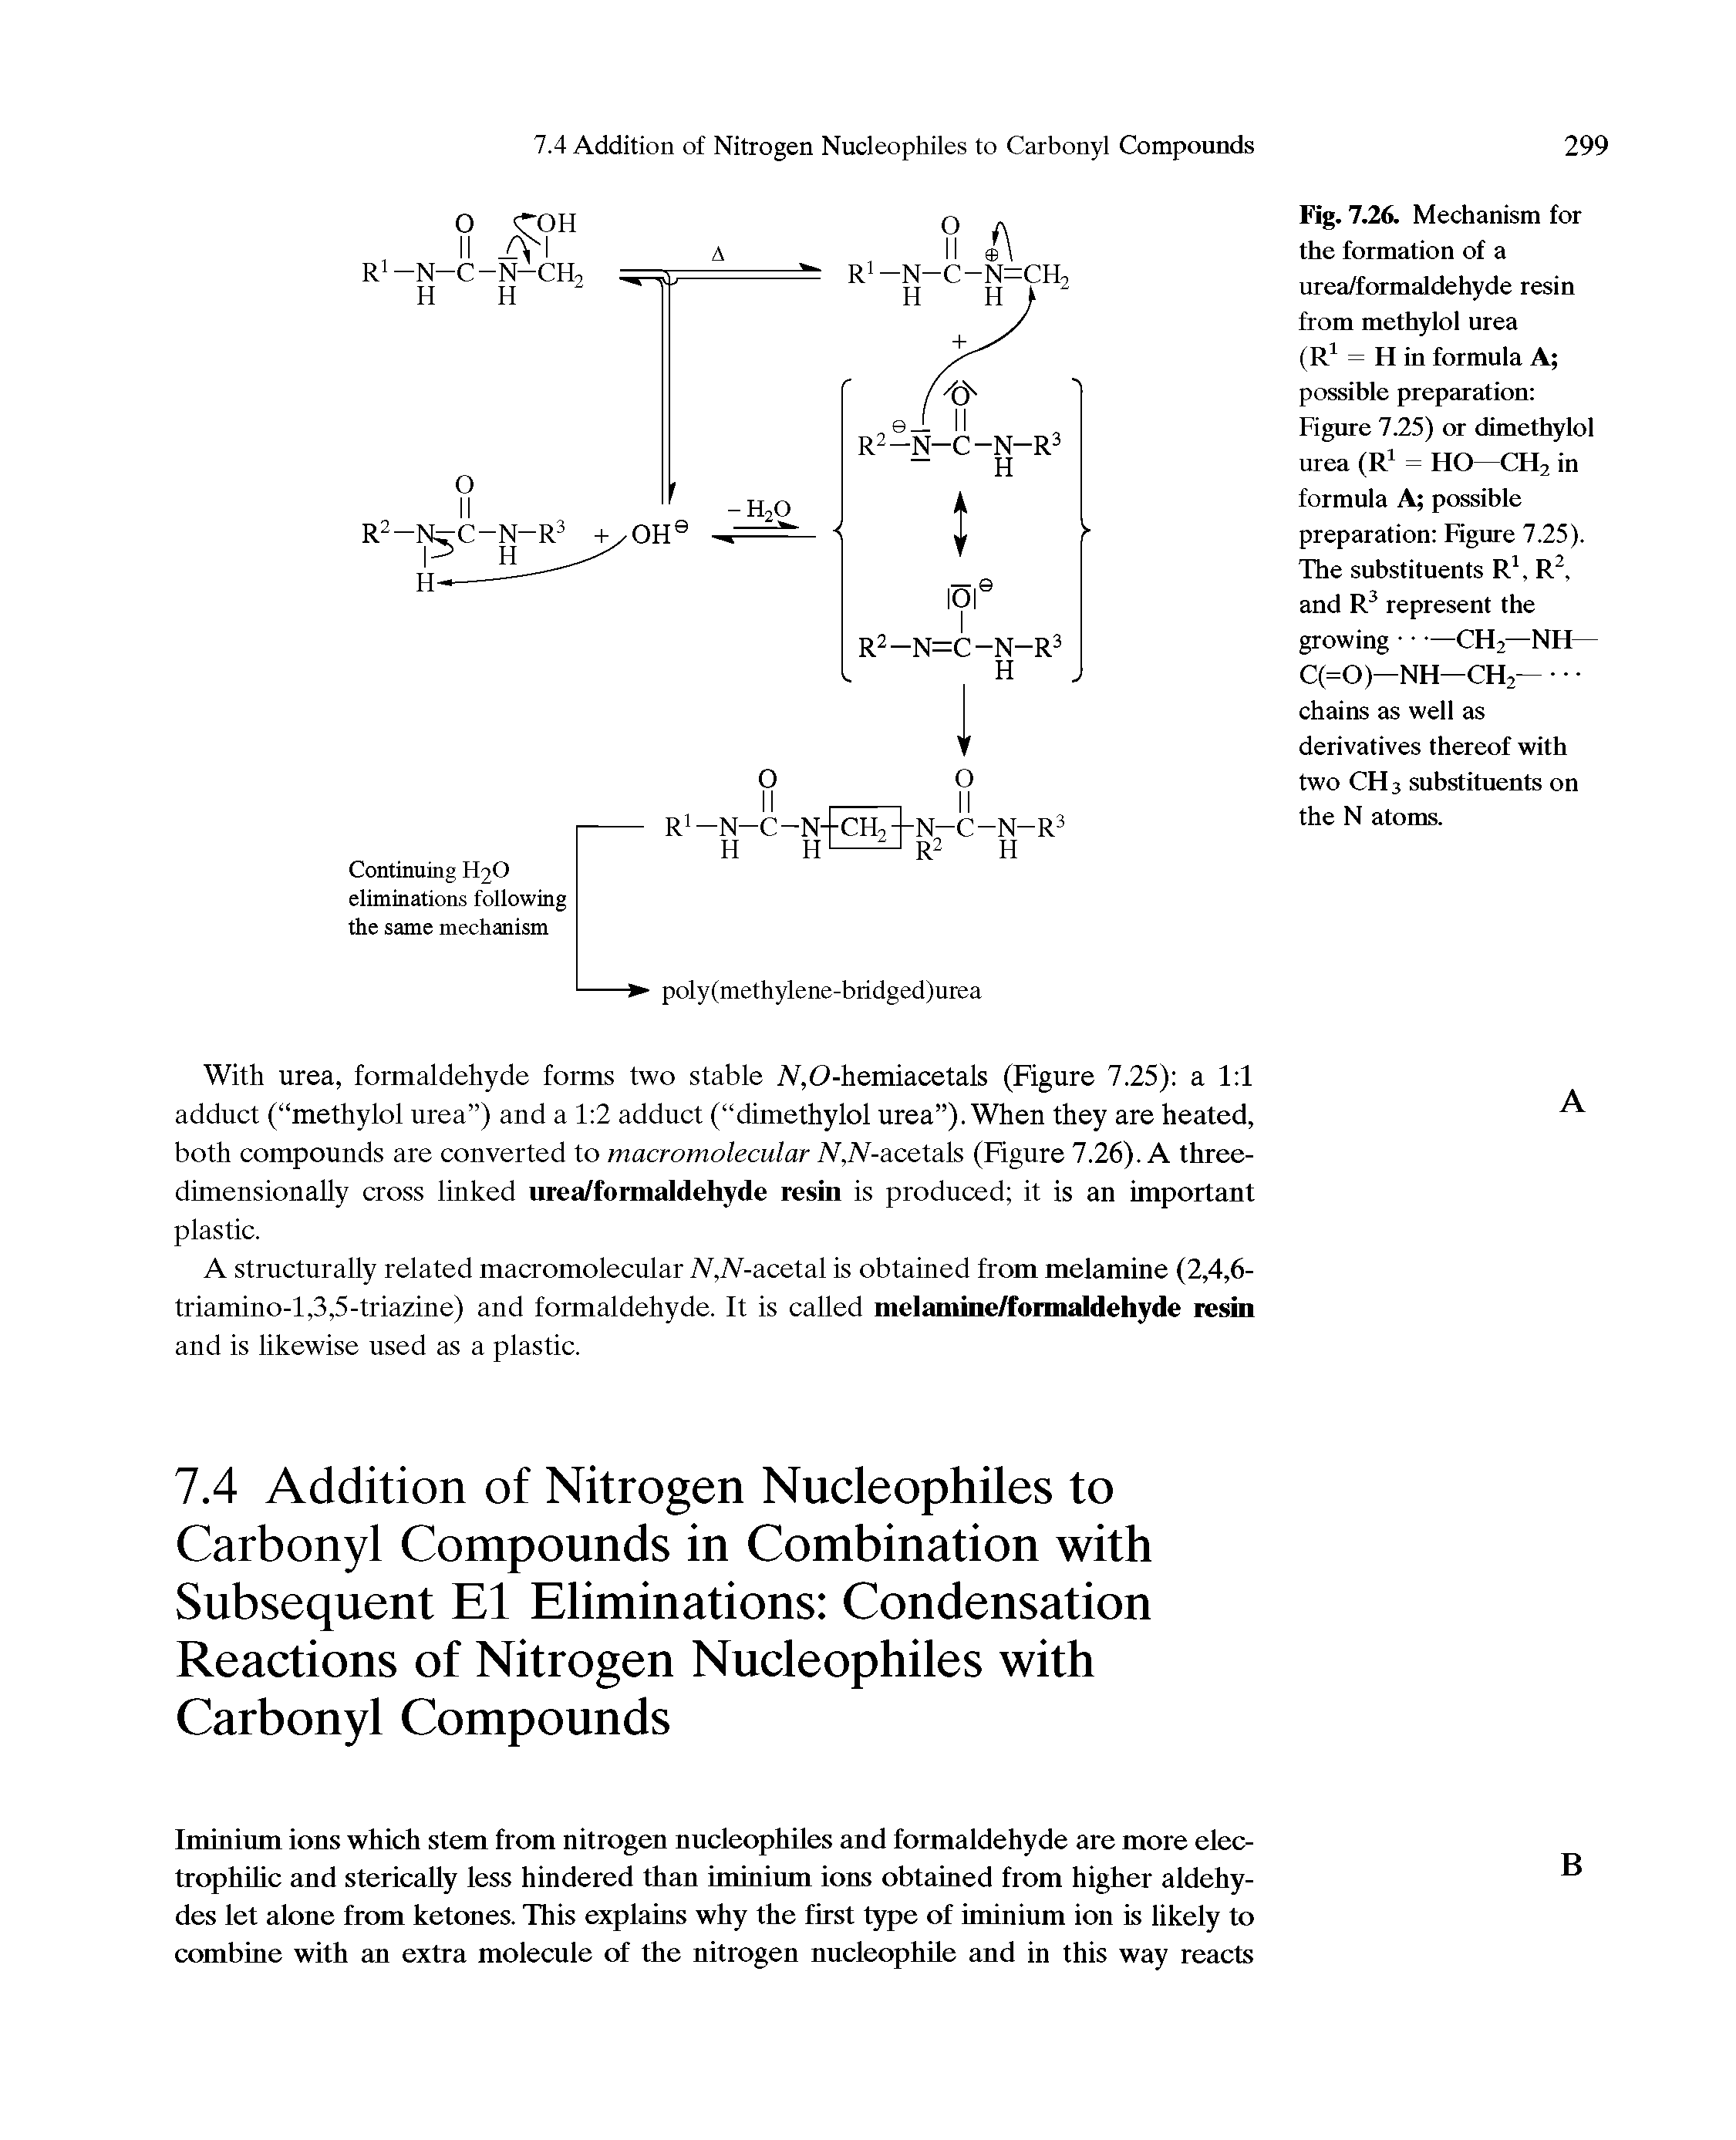 Fig. 7.26. Mechanism for the formation of a urea/formaldehyde resin from methylol urea (R1 = H in formula A possible preparation Figure 7.25) or dimethylol urea (R1 = HO CH2 in formula A possible preparation Figure 7.25). The substituents R1, R2, and R3 represent the growing —CH2—NH—...